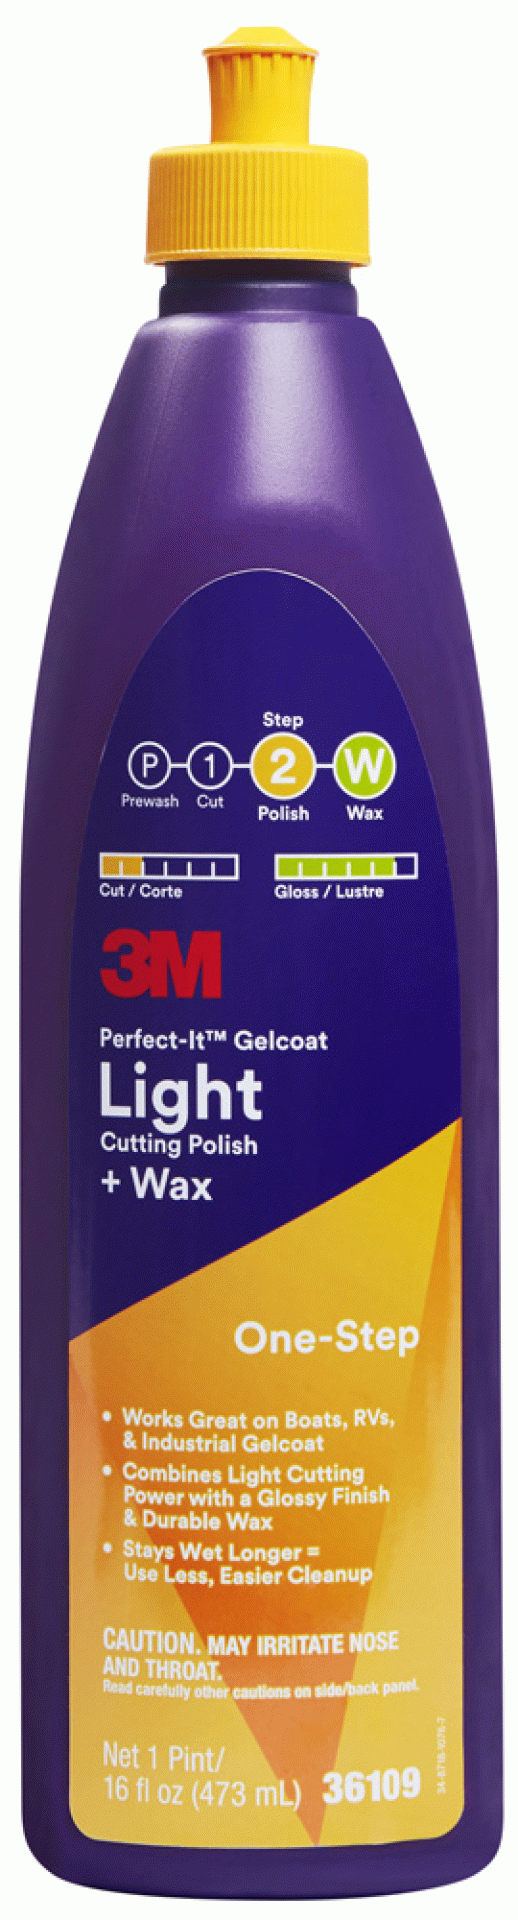 3M Company | 36109 | Perfect-It GelCoat Light Cutting Polish and Wax - 16 Oz.